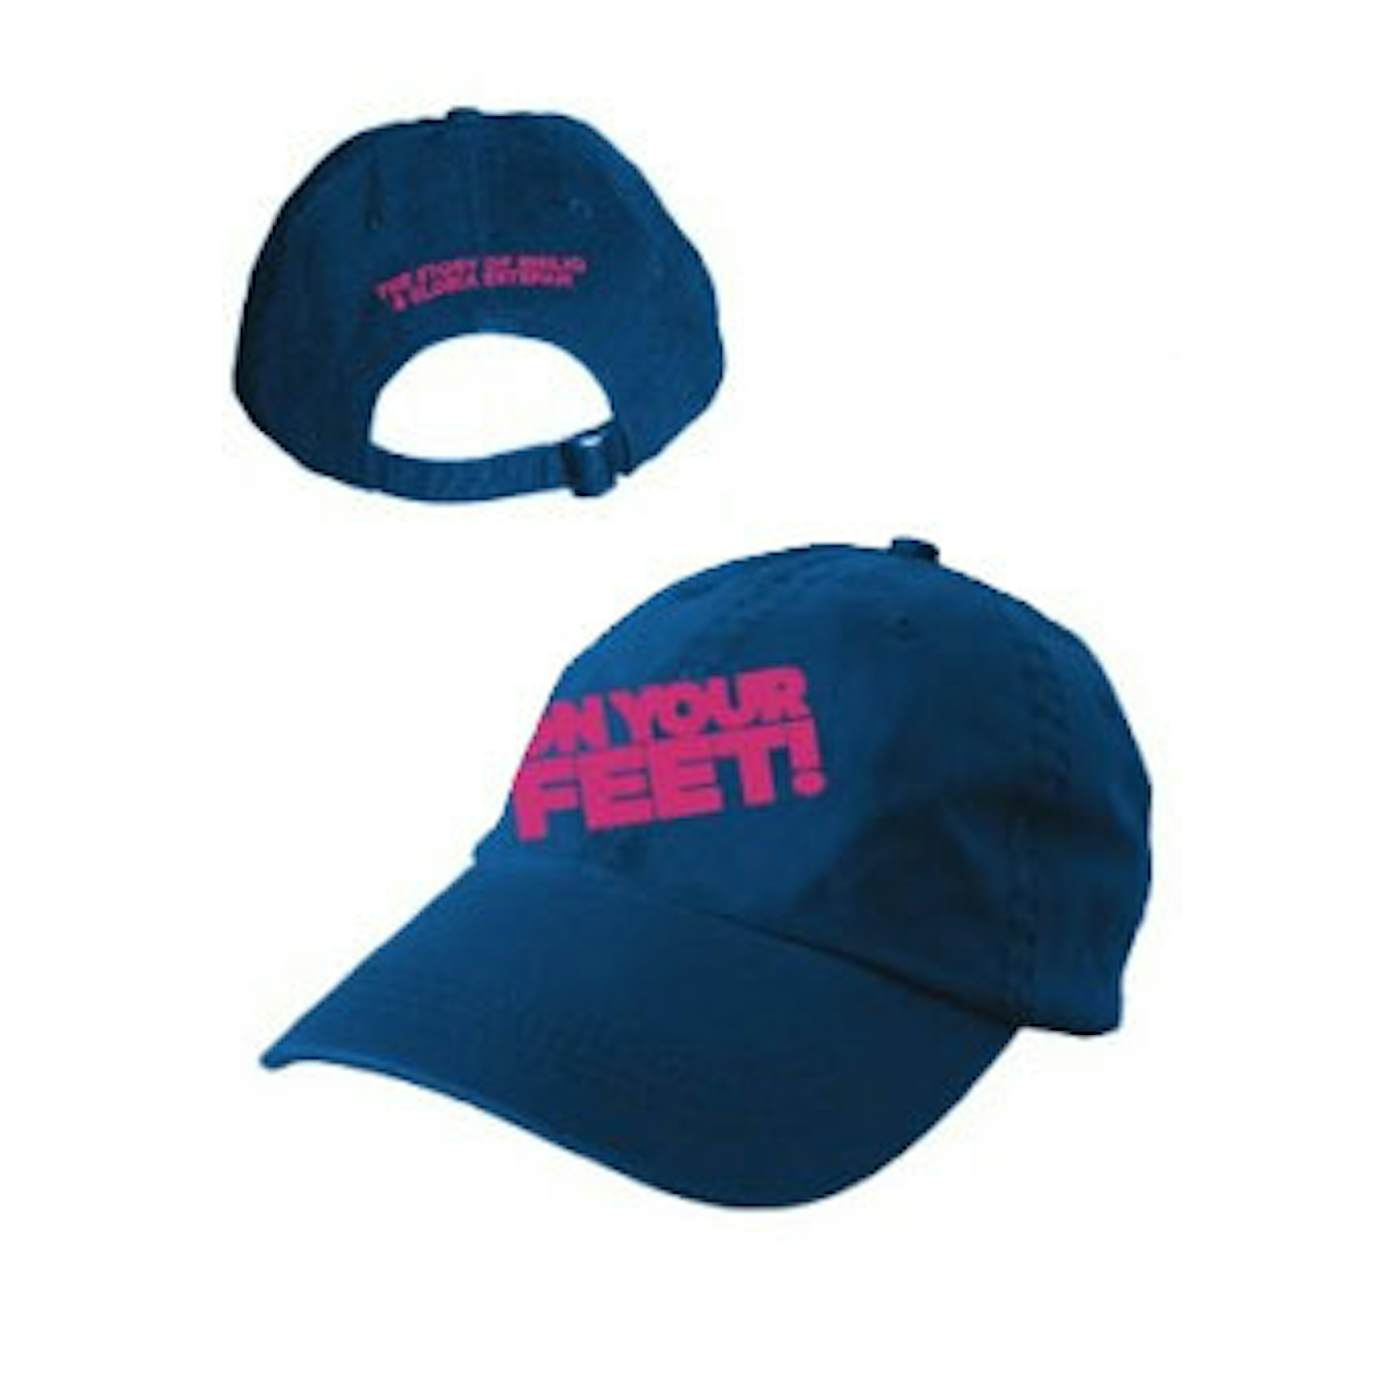 ON YOUR FEET: THE STORY OF EMILIO & GLORIA On Your Feet Blue Baseball Cap